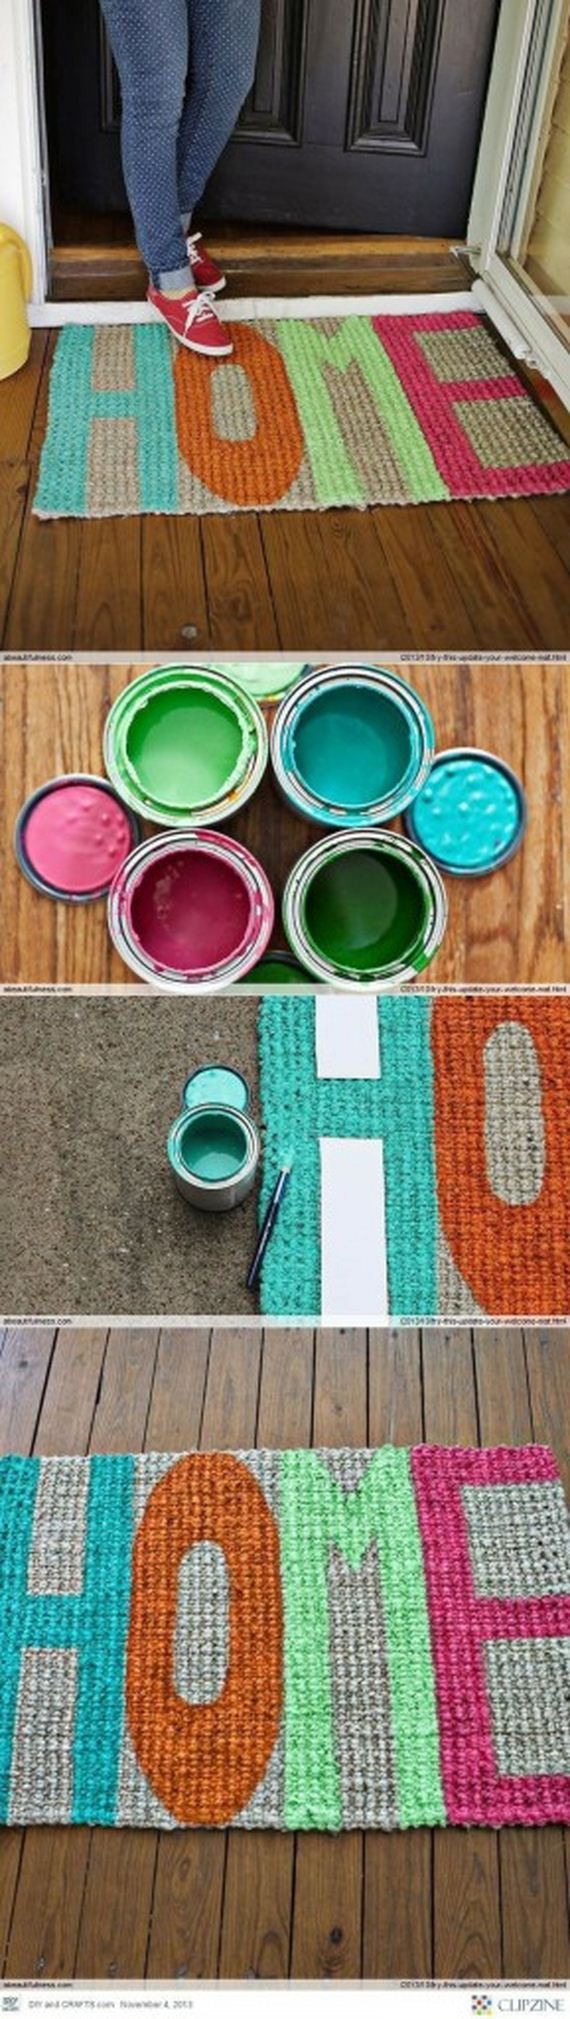 19-DIY-SPRING-PROJECTS